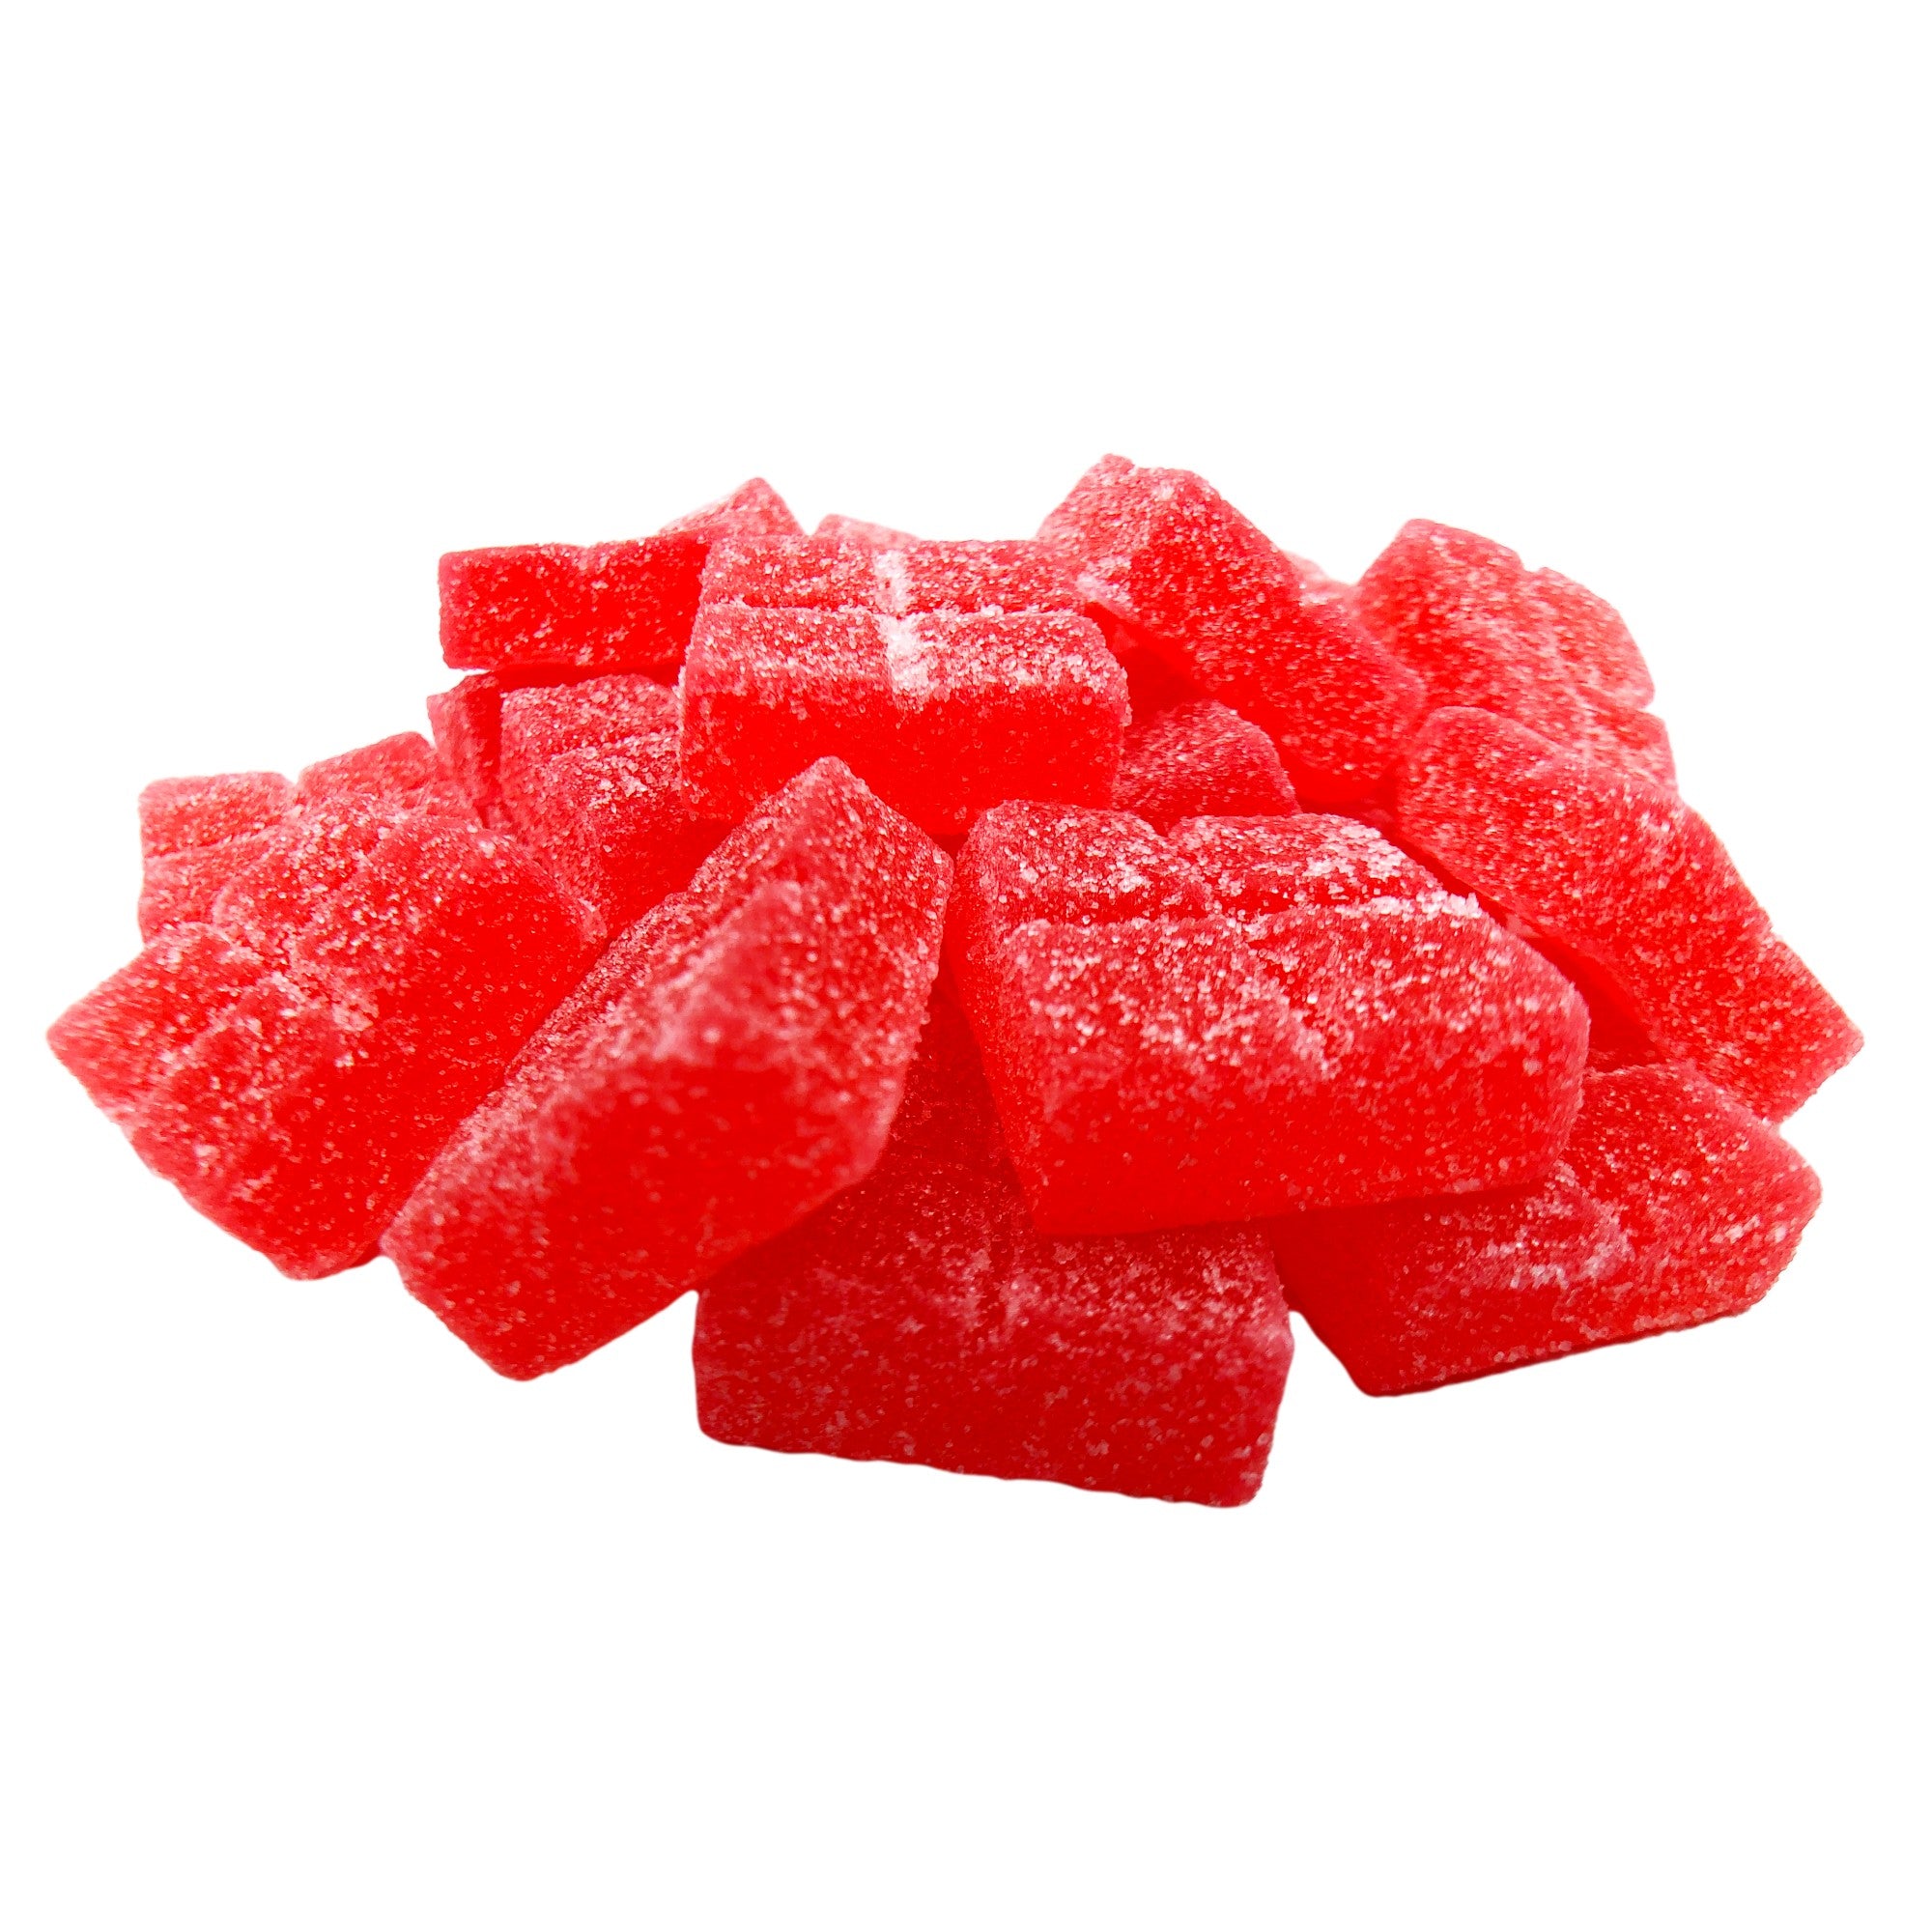  Hippy Mood X Capone Red Rum Punch D9 Gummies